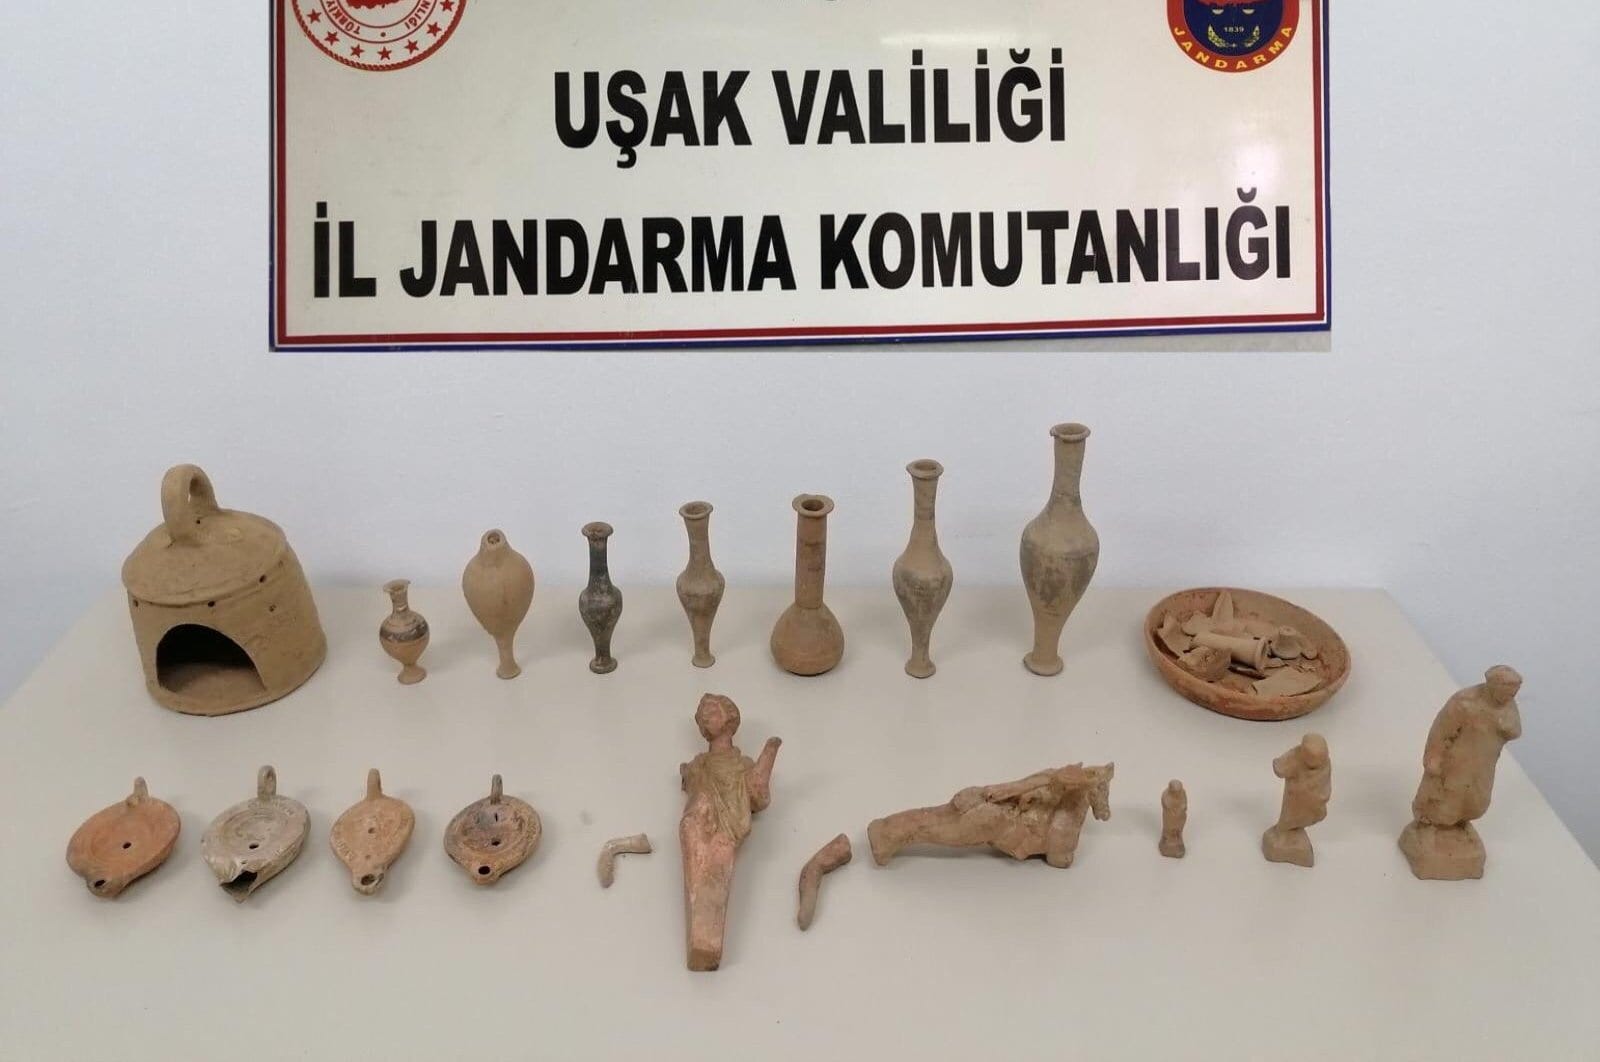 18 historical artifacts seized from smugglers in Turkey